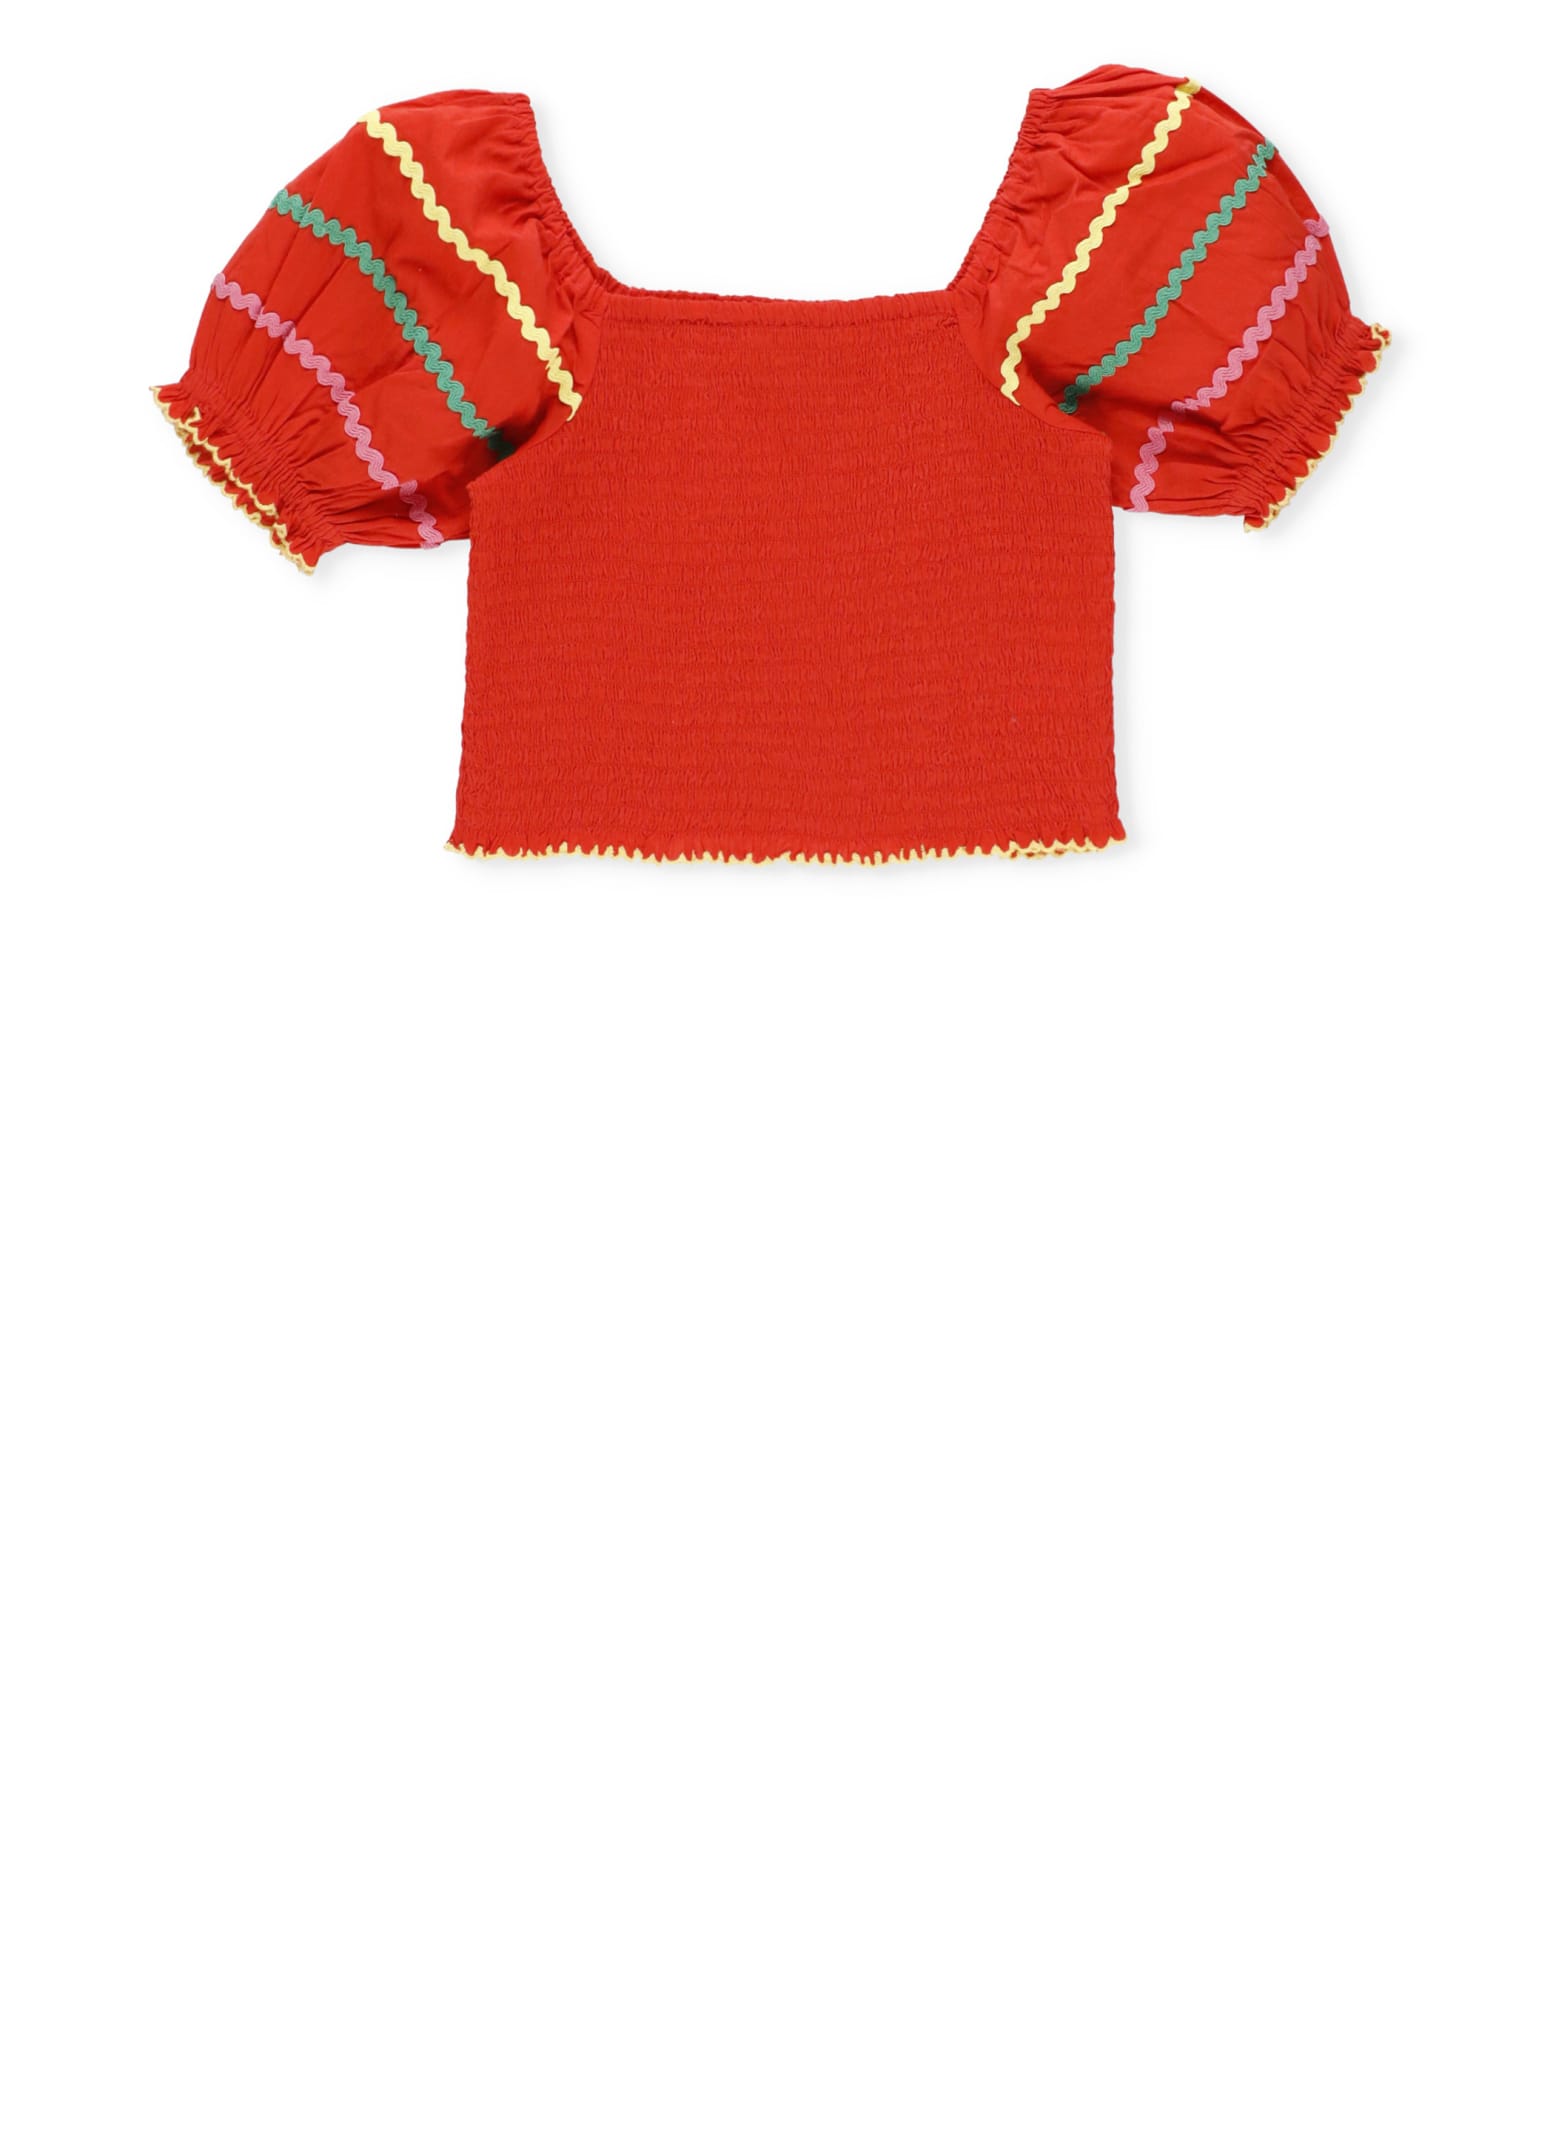 STELLA MCCARTNEY CROPPED TOP WITH EMBROIDERIES